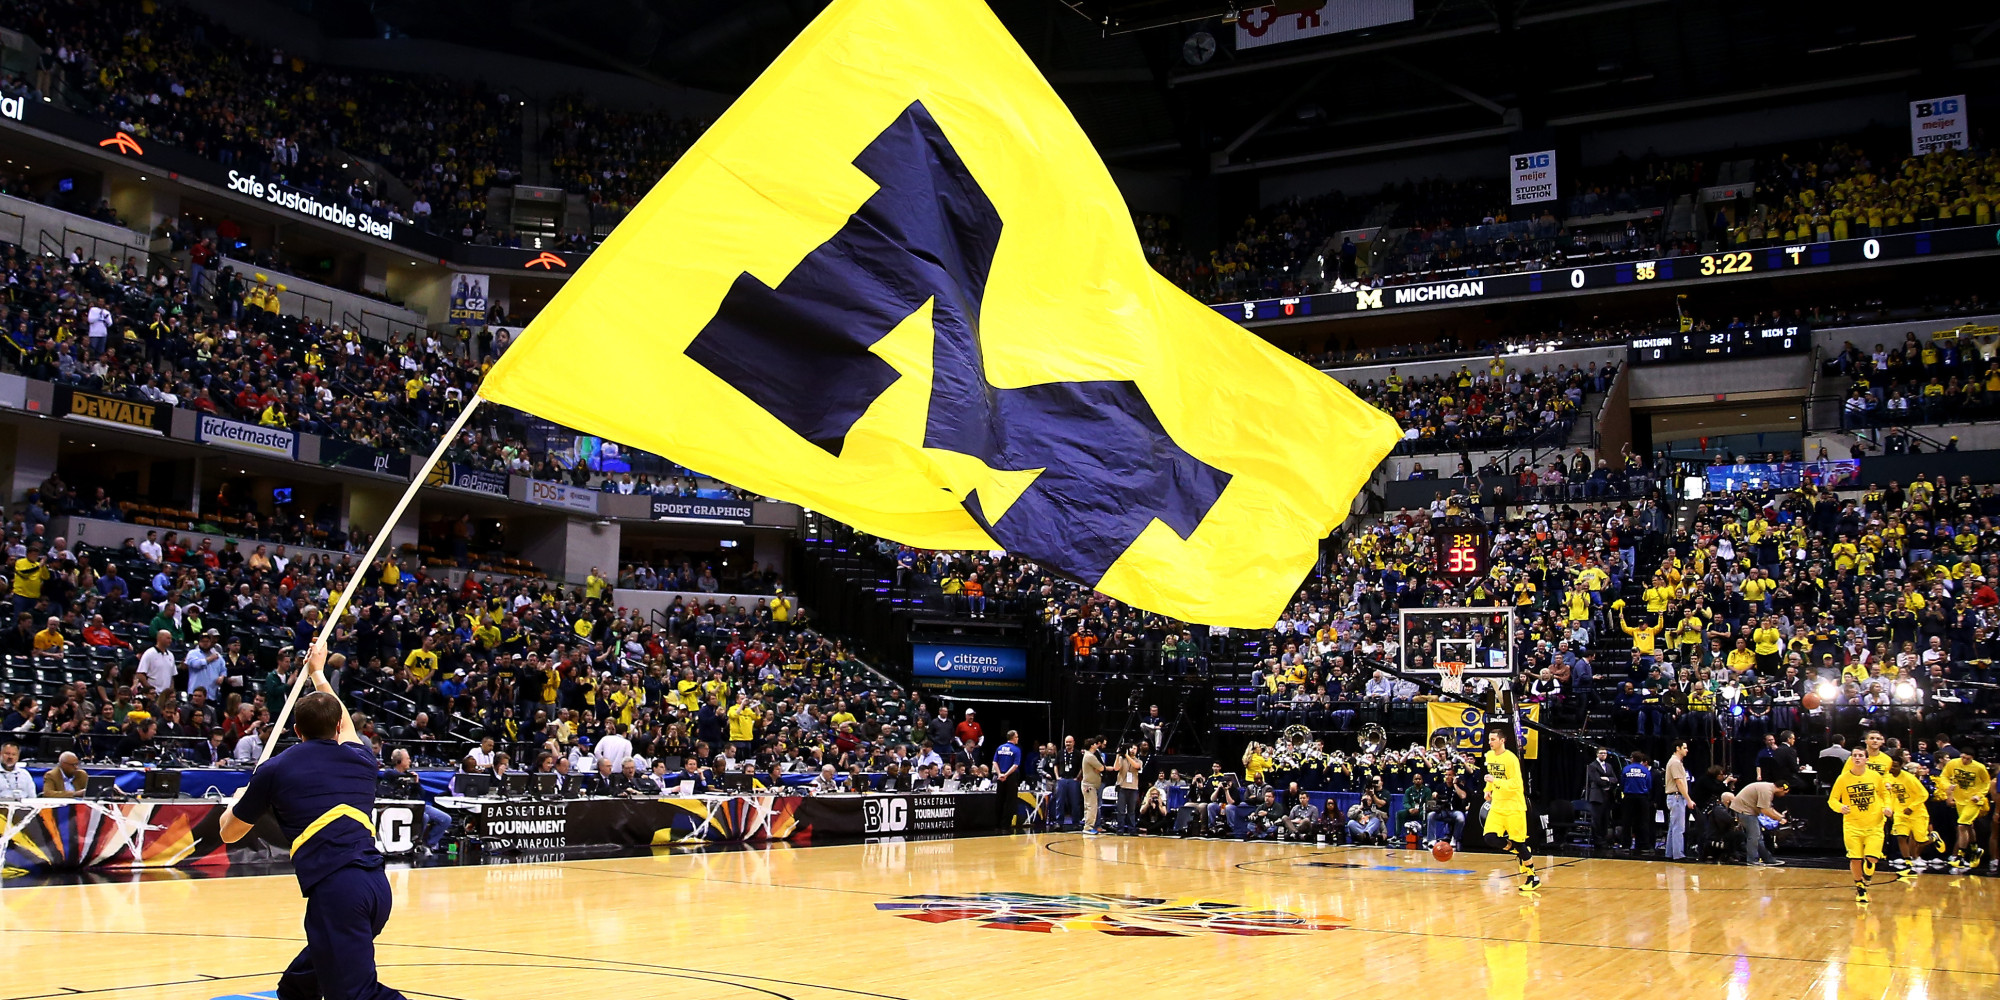 University of Michigan flag paraded on basketball court before NCAA tournament game. 